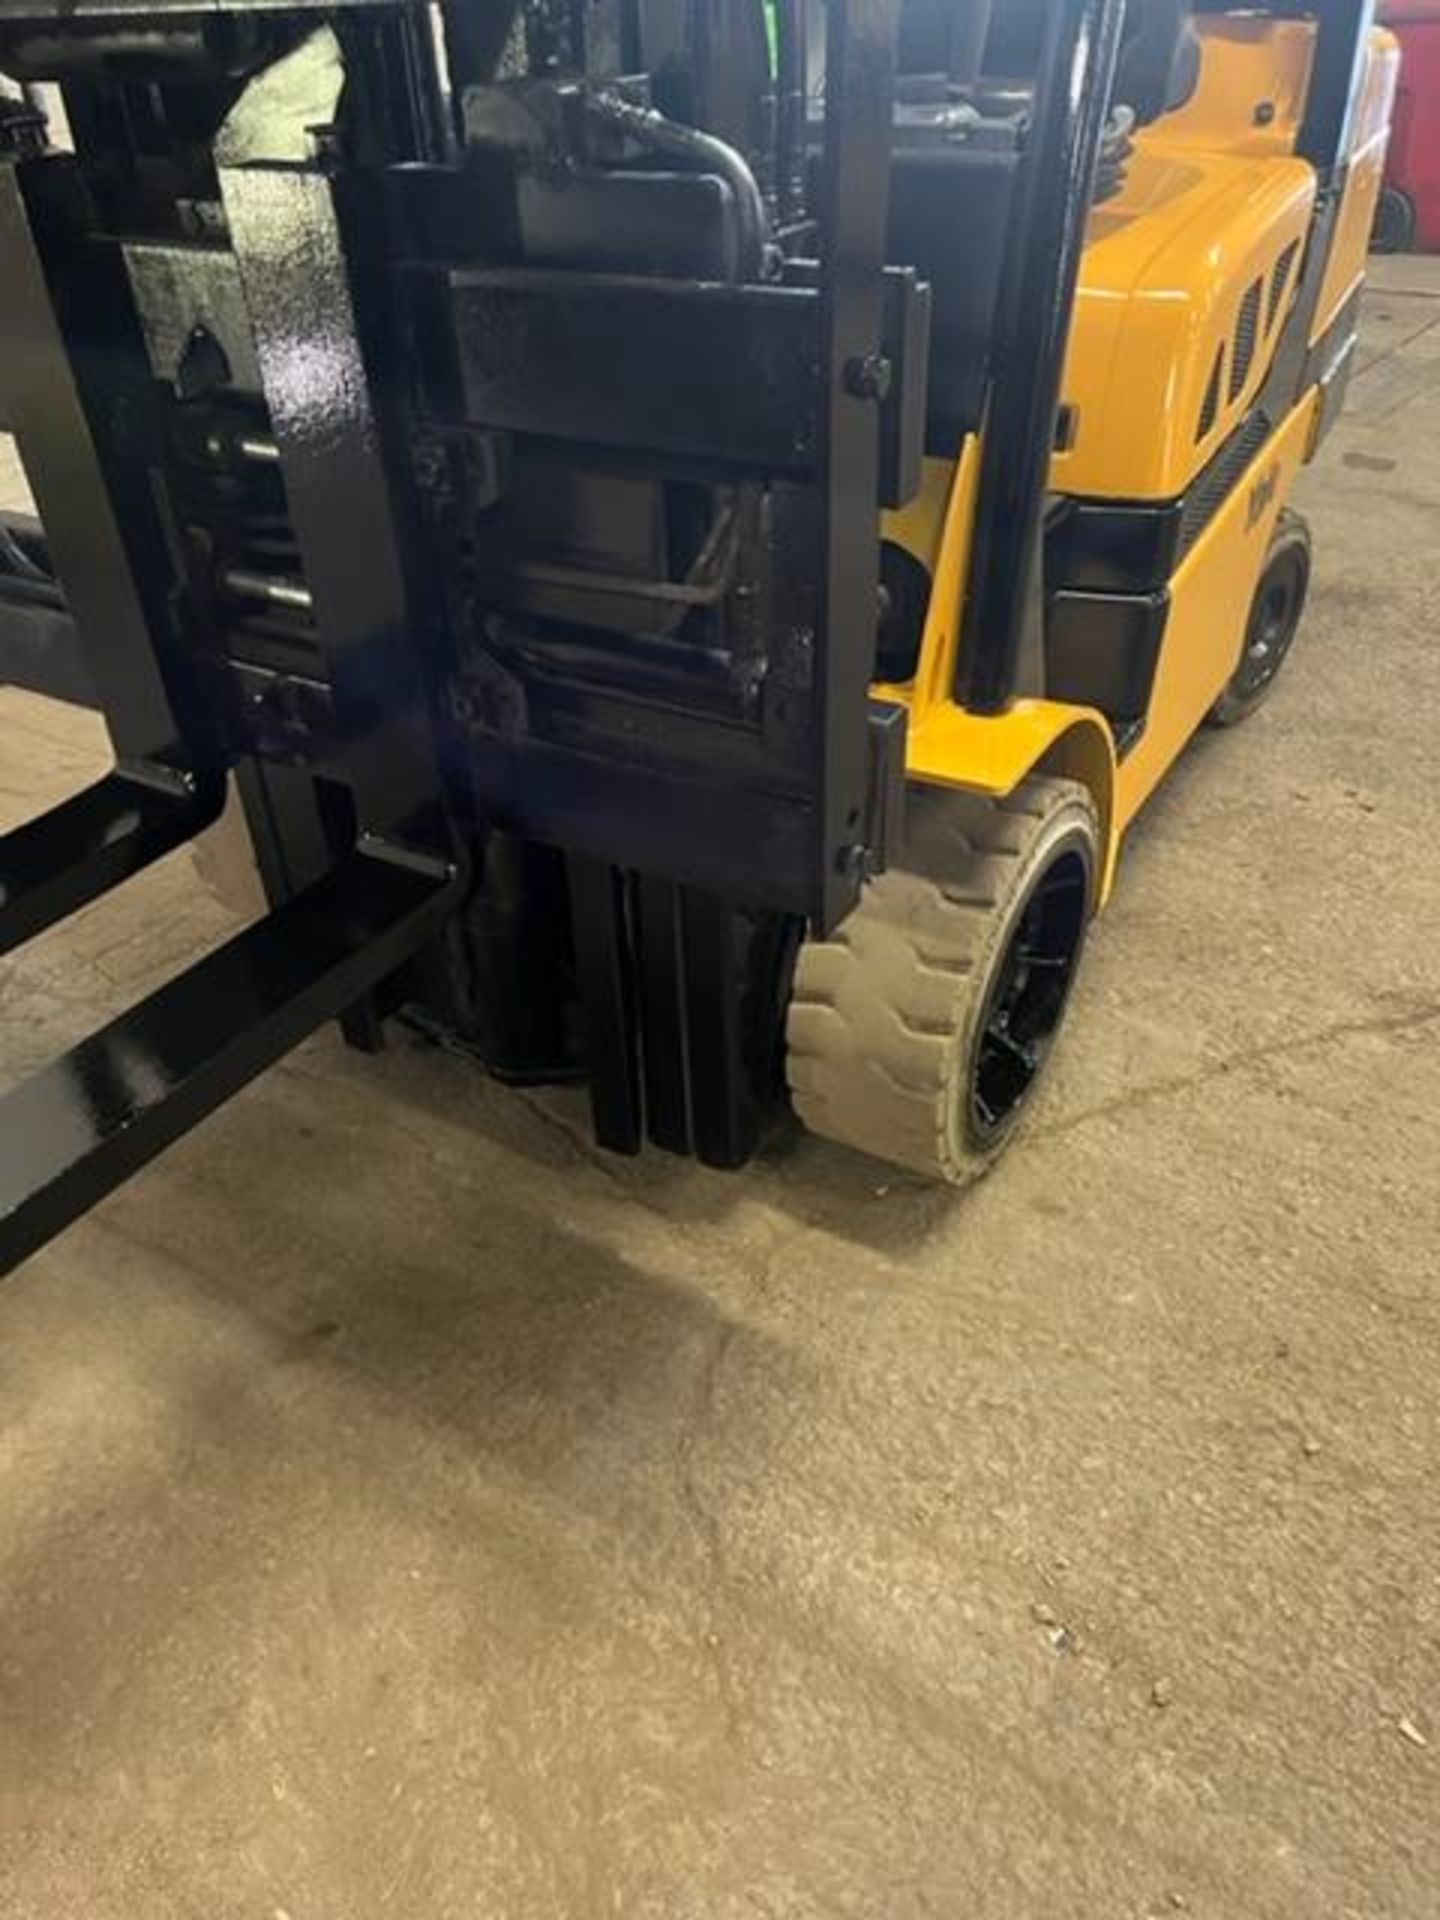 FREE CUSTOMS - NICE 2018 Yale model 80 - 8,000lbs Capacity Forklift LPG (propane) with 54" forks - Image 3 of 4